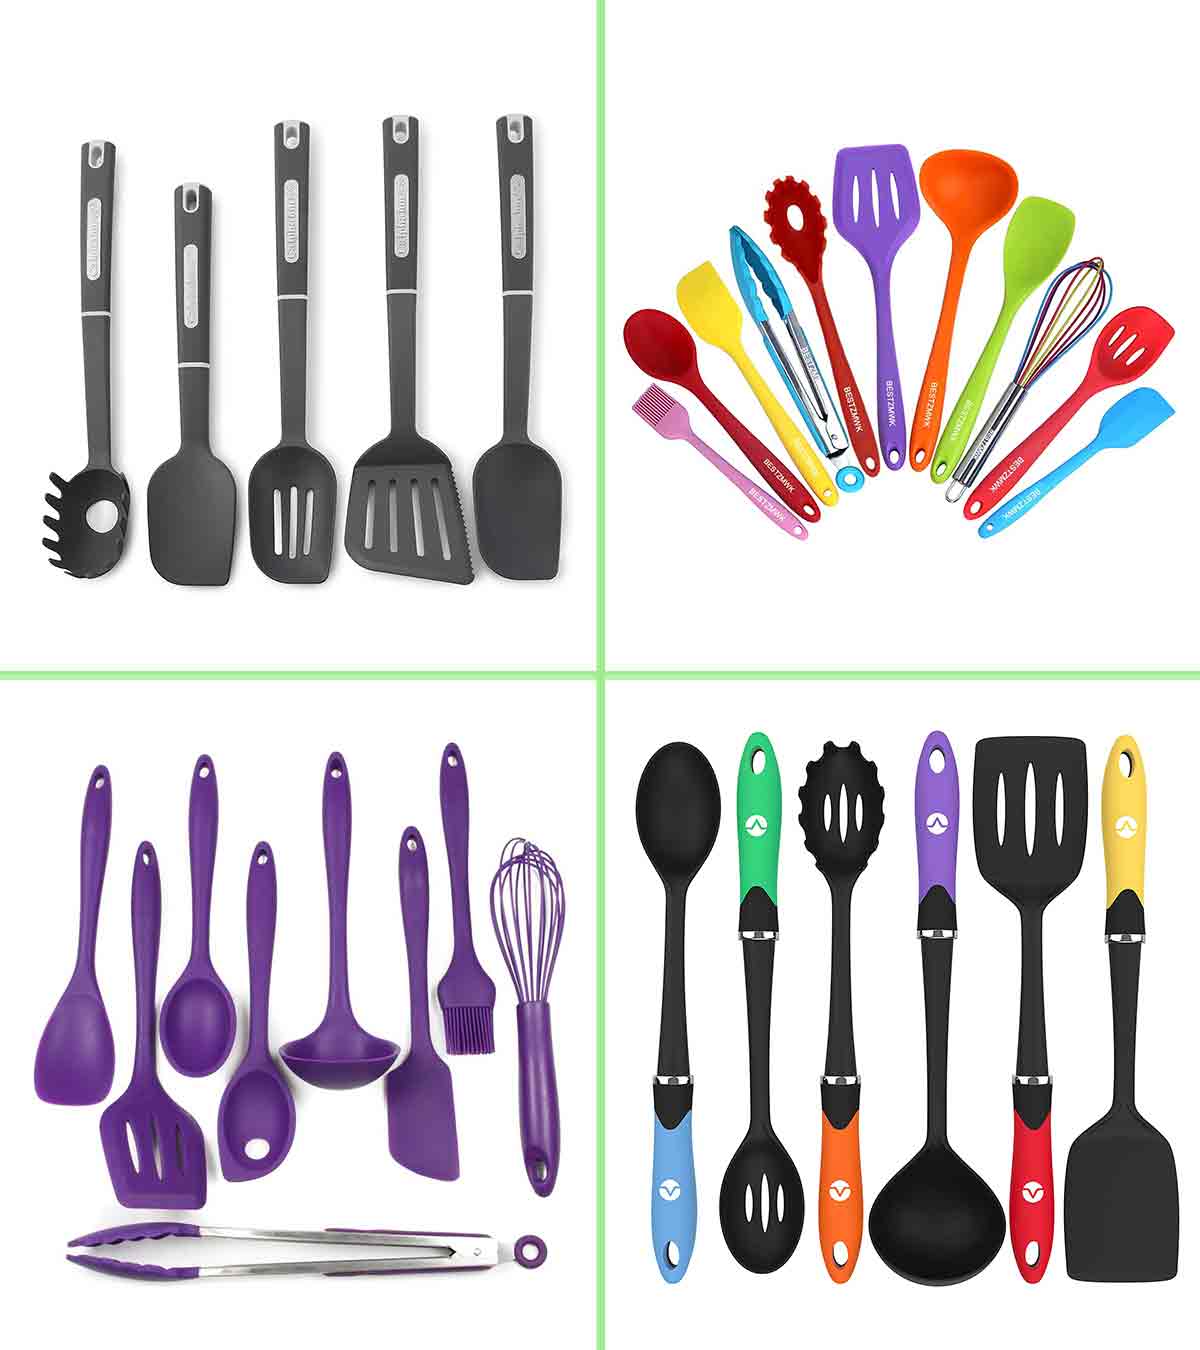 oannao Silicone Cooking Utensils Set - Heat Resistant Stainless Steel Kitchen  Utensils, Baking Tools Kitchen  Gadgets,Turner,Tongs,Spatula,Spoon,Brush,Whisk,Non-Stick Friendly,  Dishwasher Safe (Grey) 